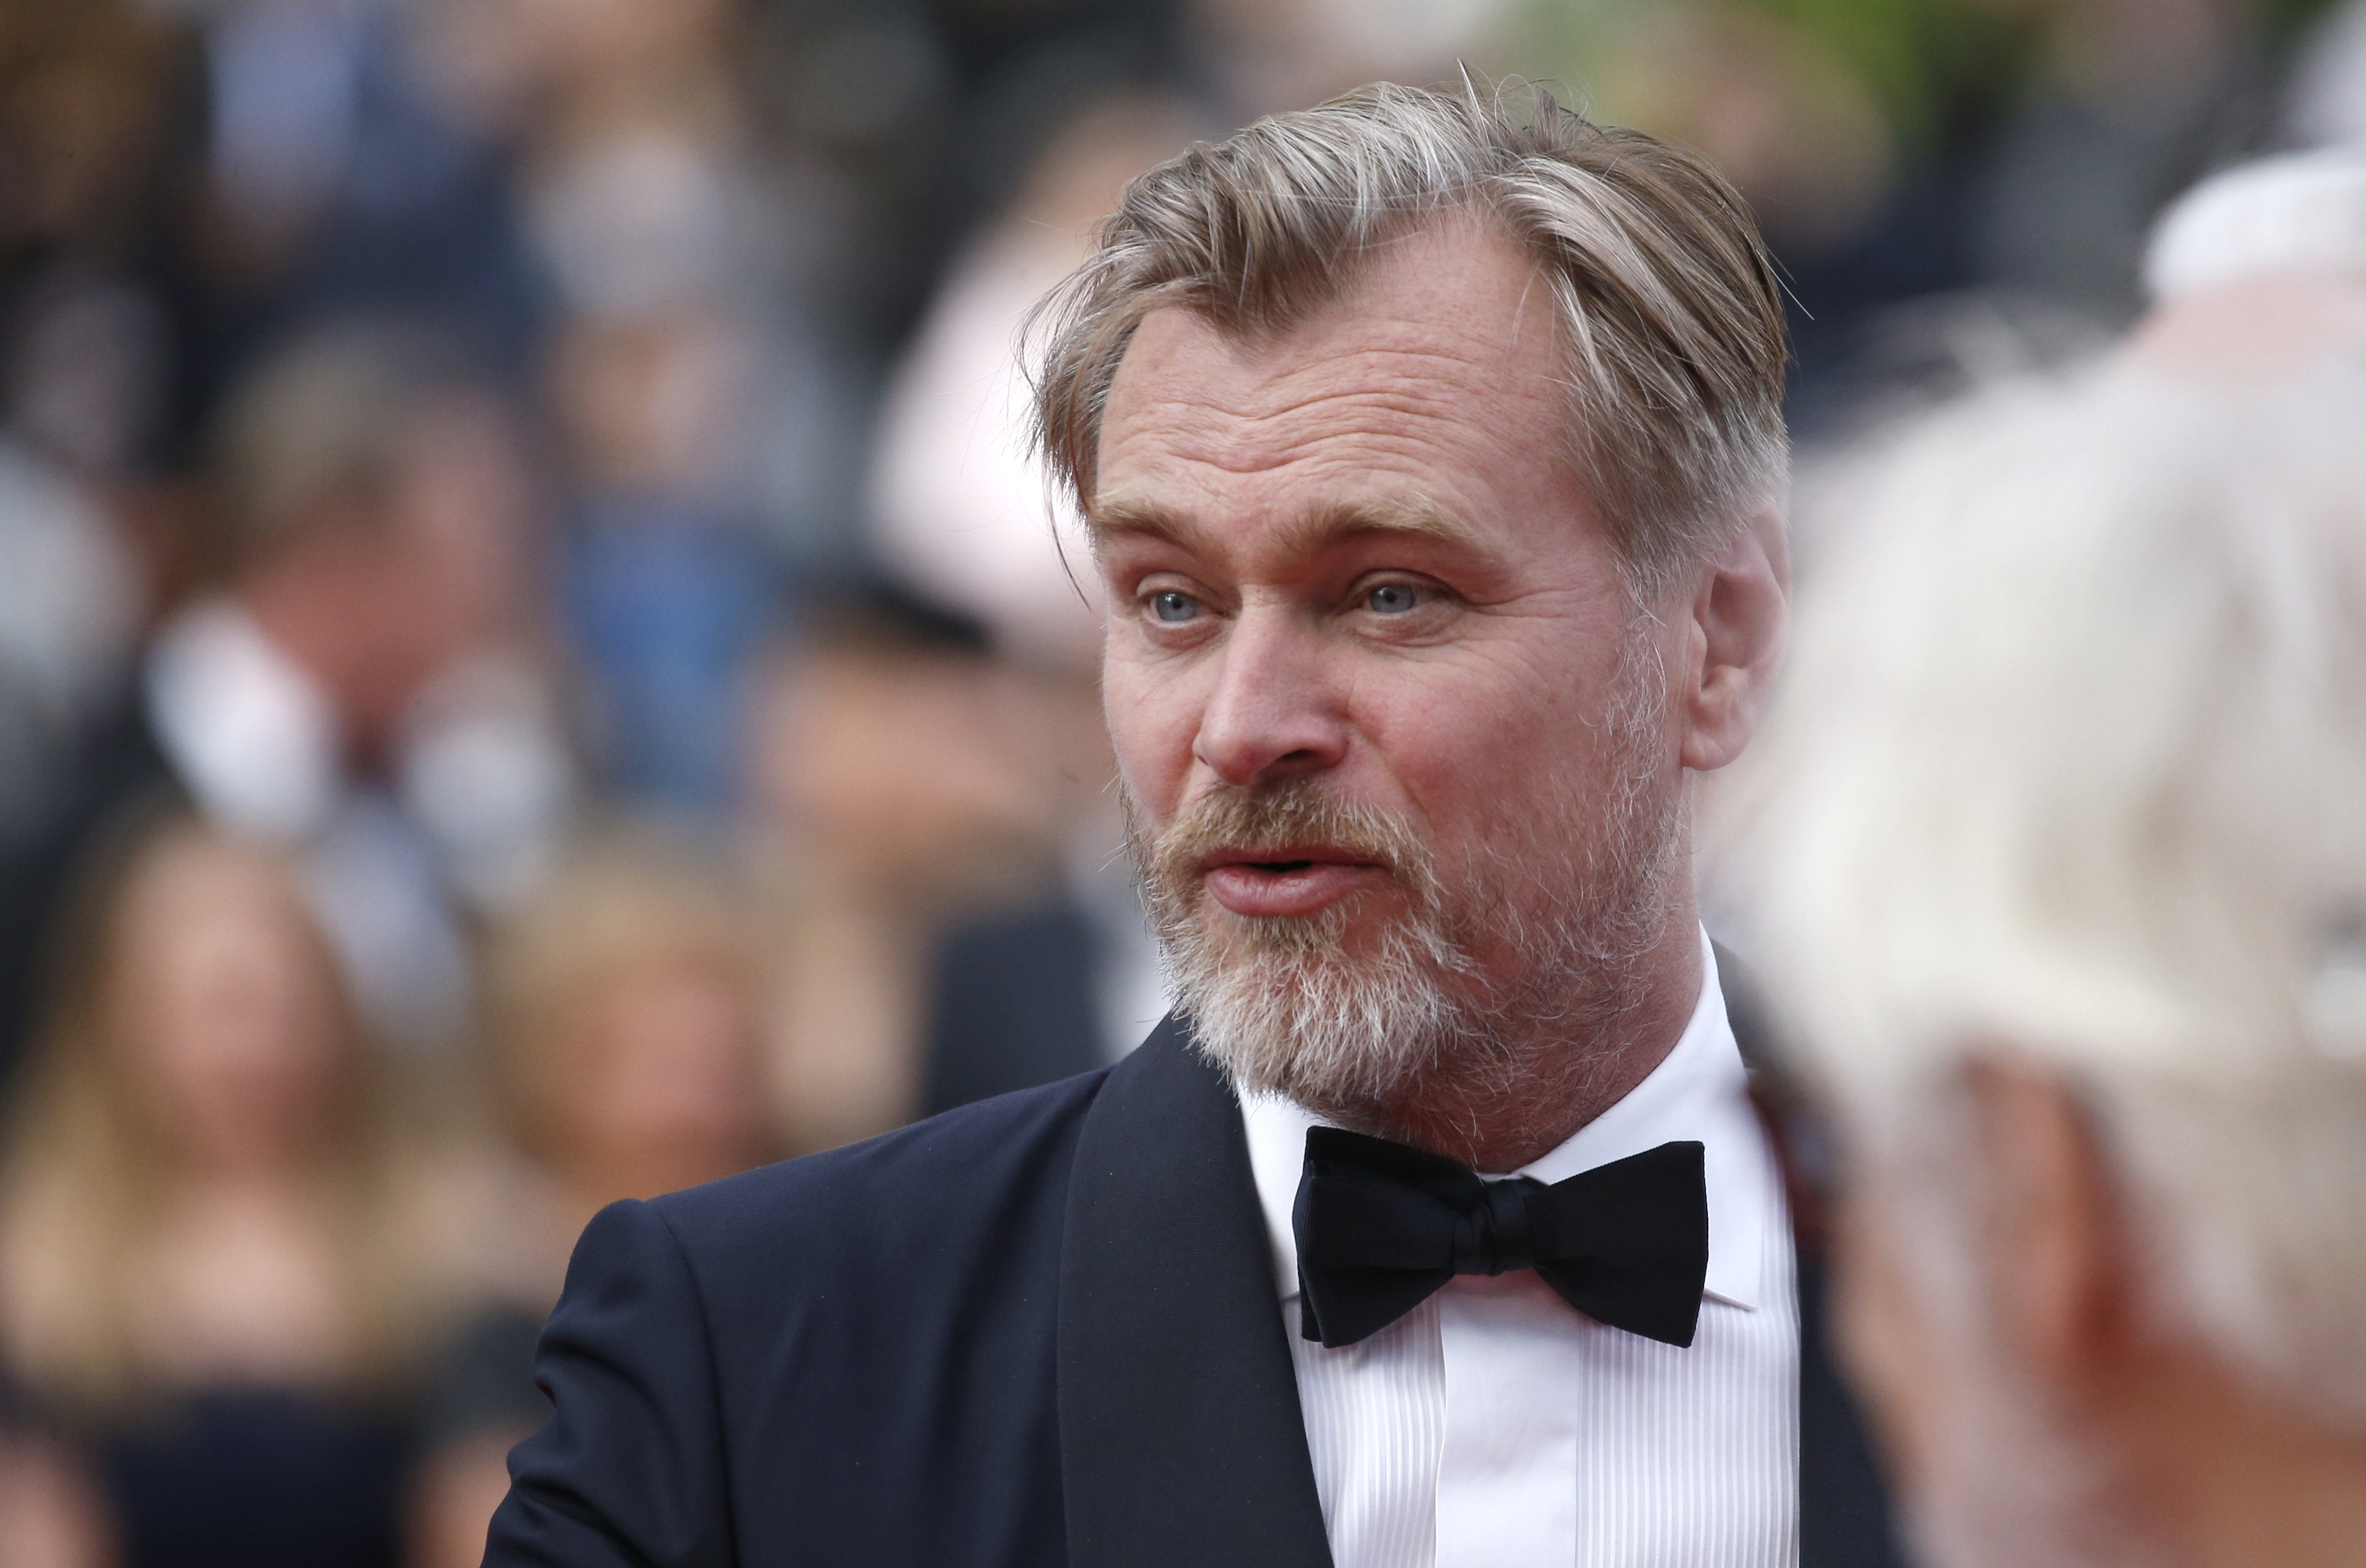 Christopher Nolan Made 'Star Wars' Movies Called 'Space Wars